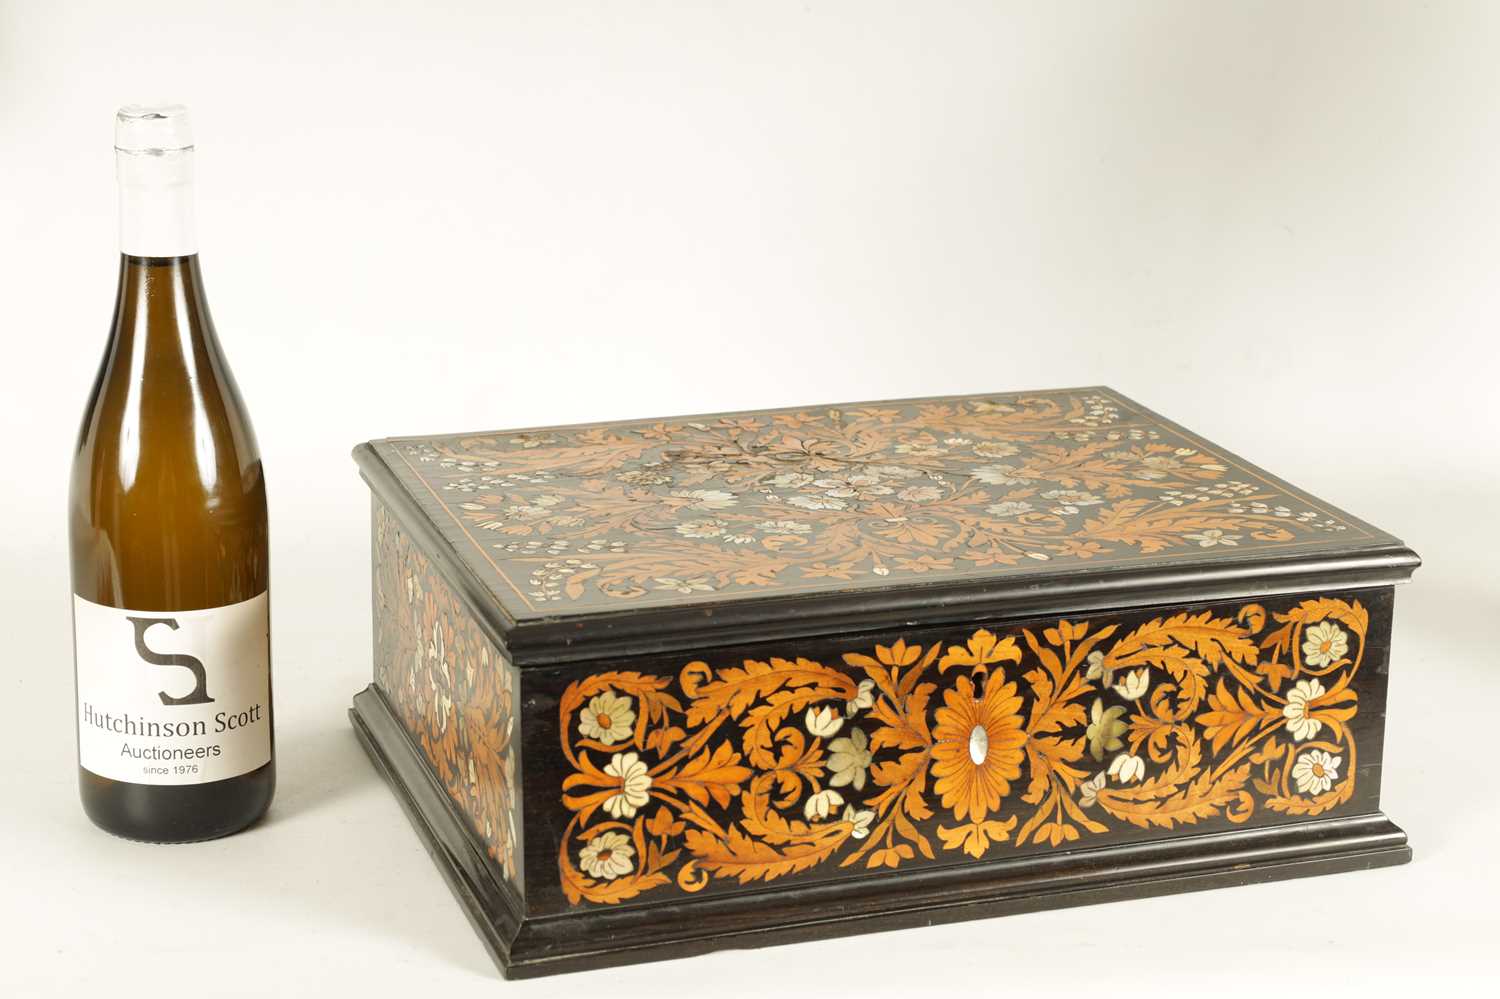 A FINE 18TH/19TH CENTURY ITALIAN FLORAL MARQUETRY EBONY, IVORY AND MOTHER OF PEARL INLAID TABLE BOX - Image 2 of 9